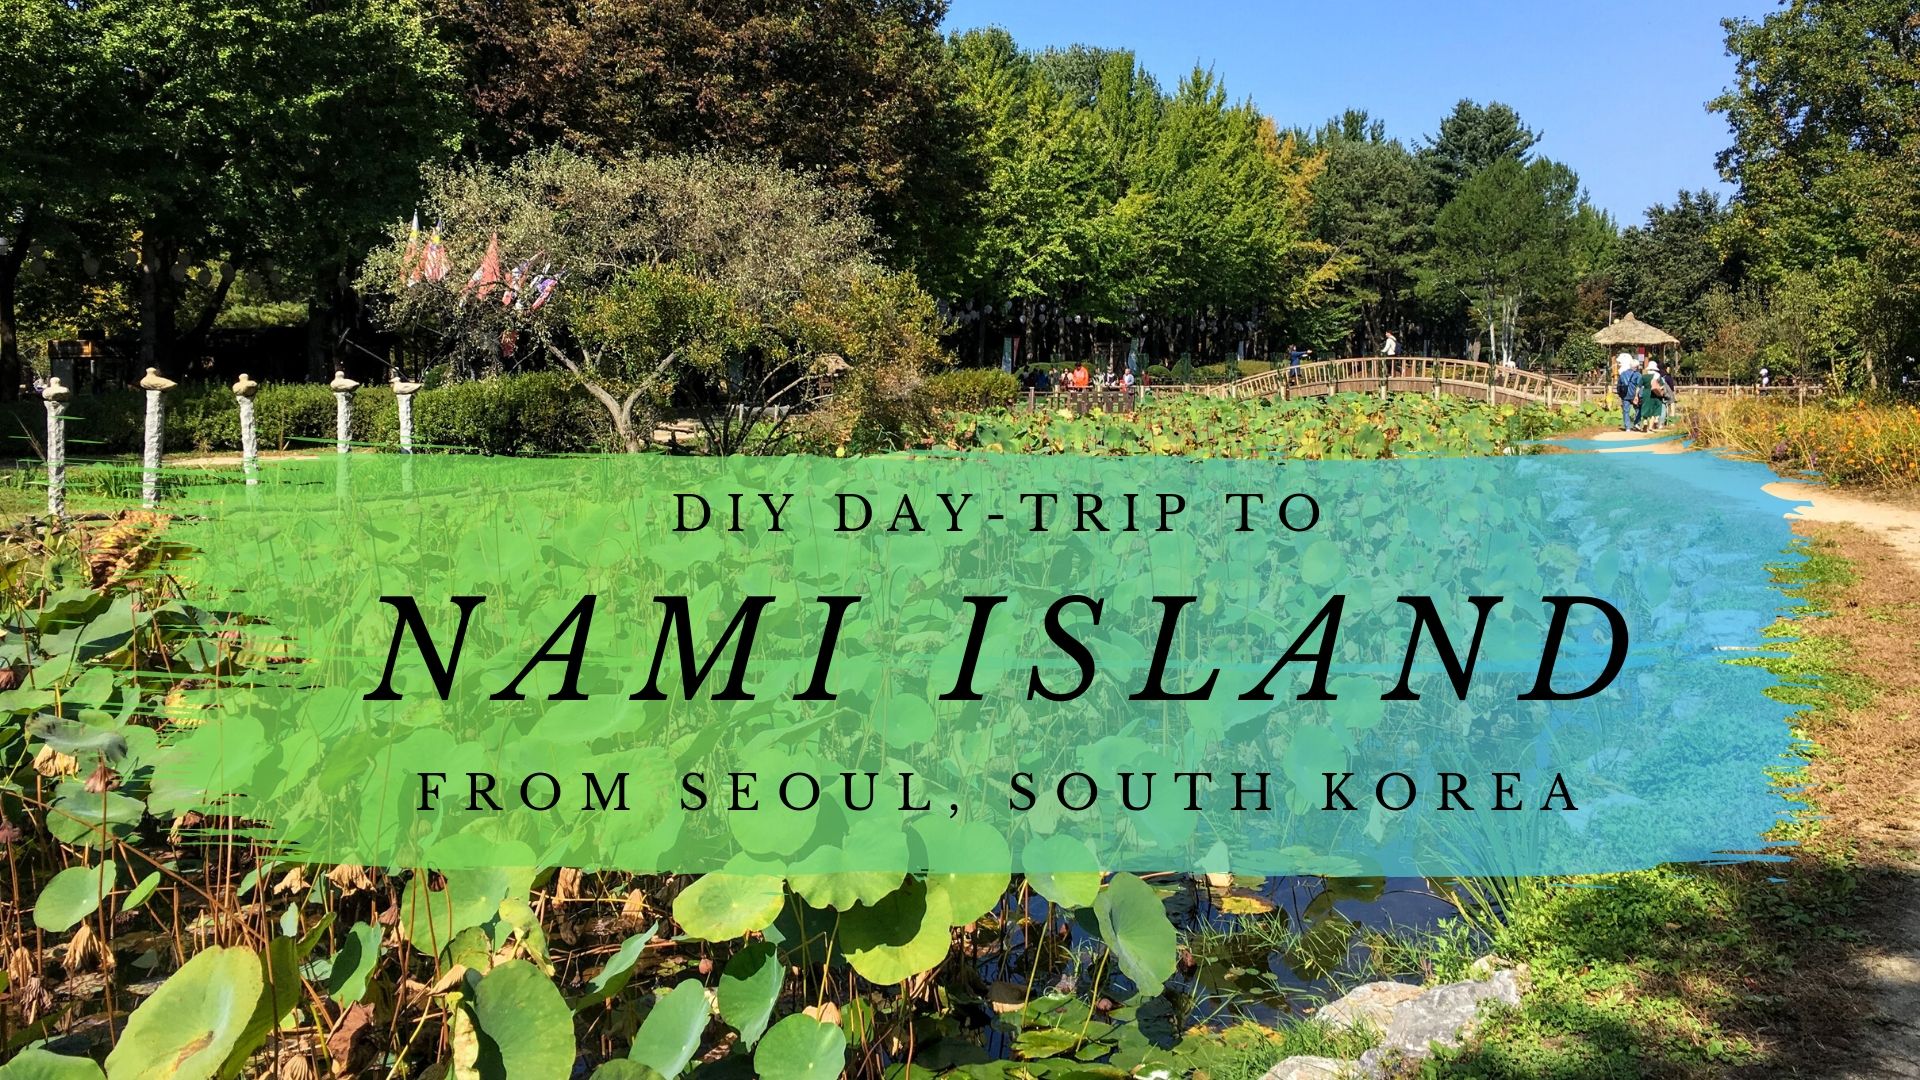 DIY Trip to Nami Island from Seoul, how to get there, things to do on Nami Island, Do it yourself trip to Nami Island without a tour from Seoul Winter Sonata